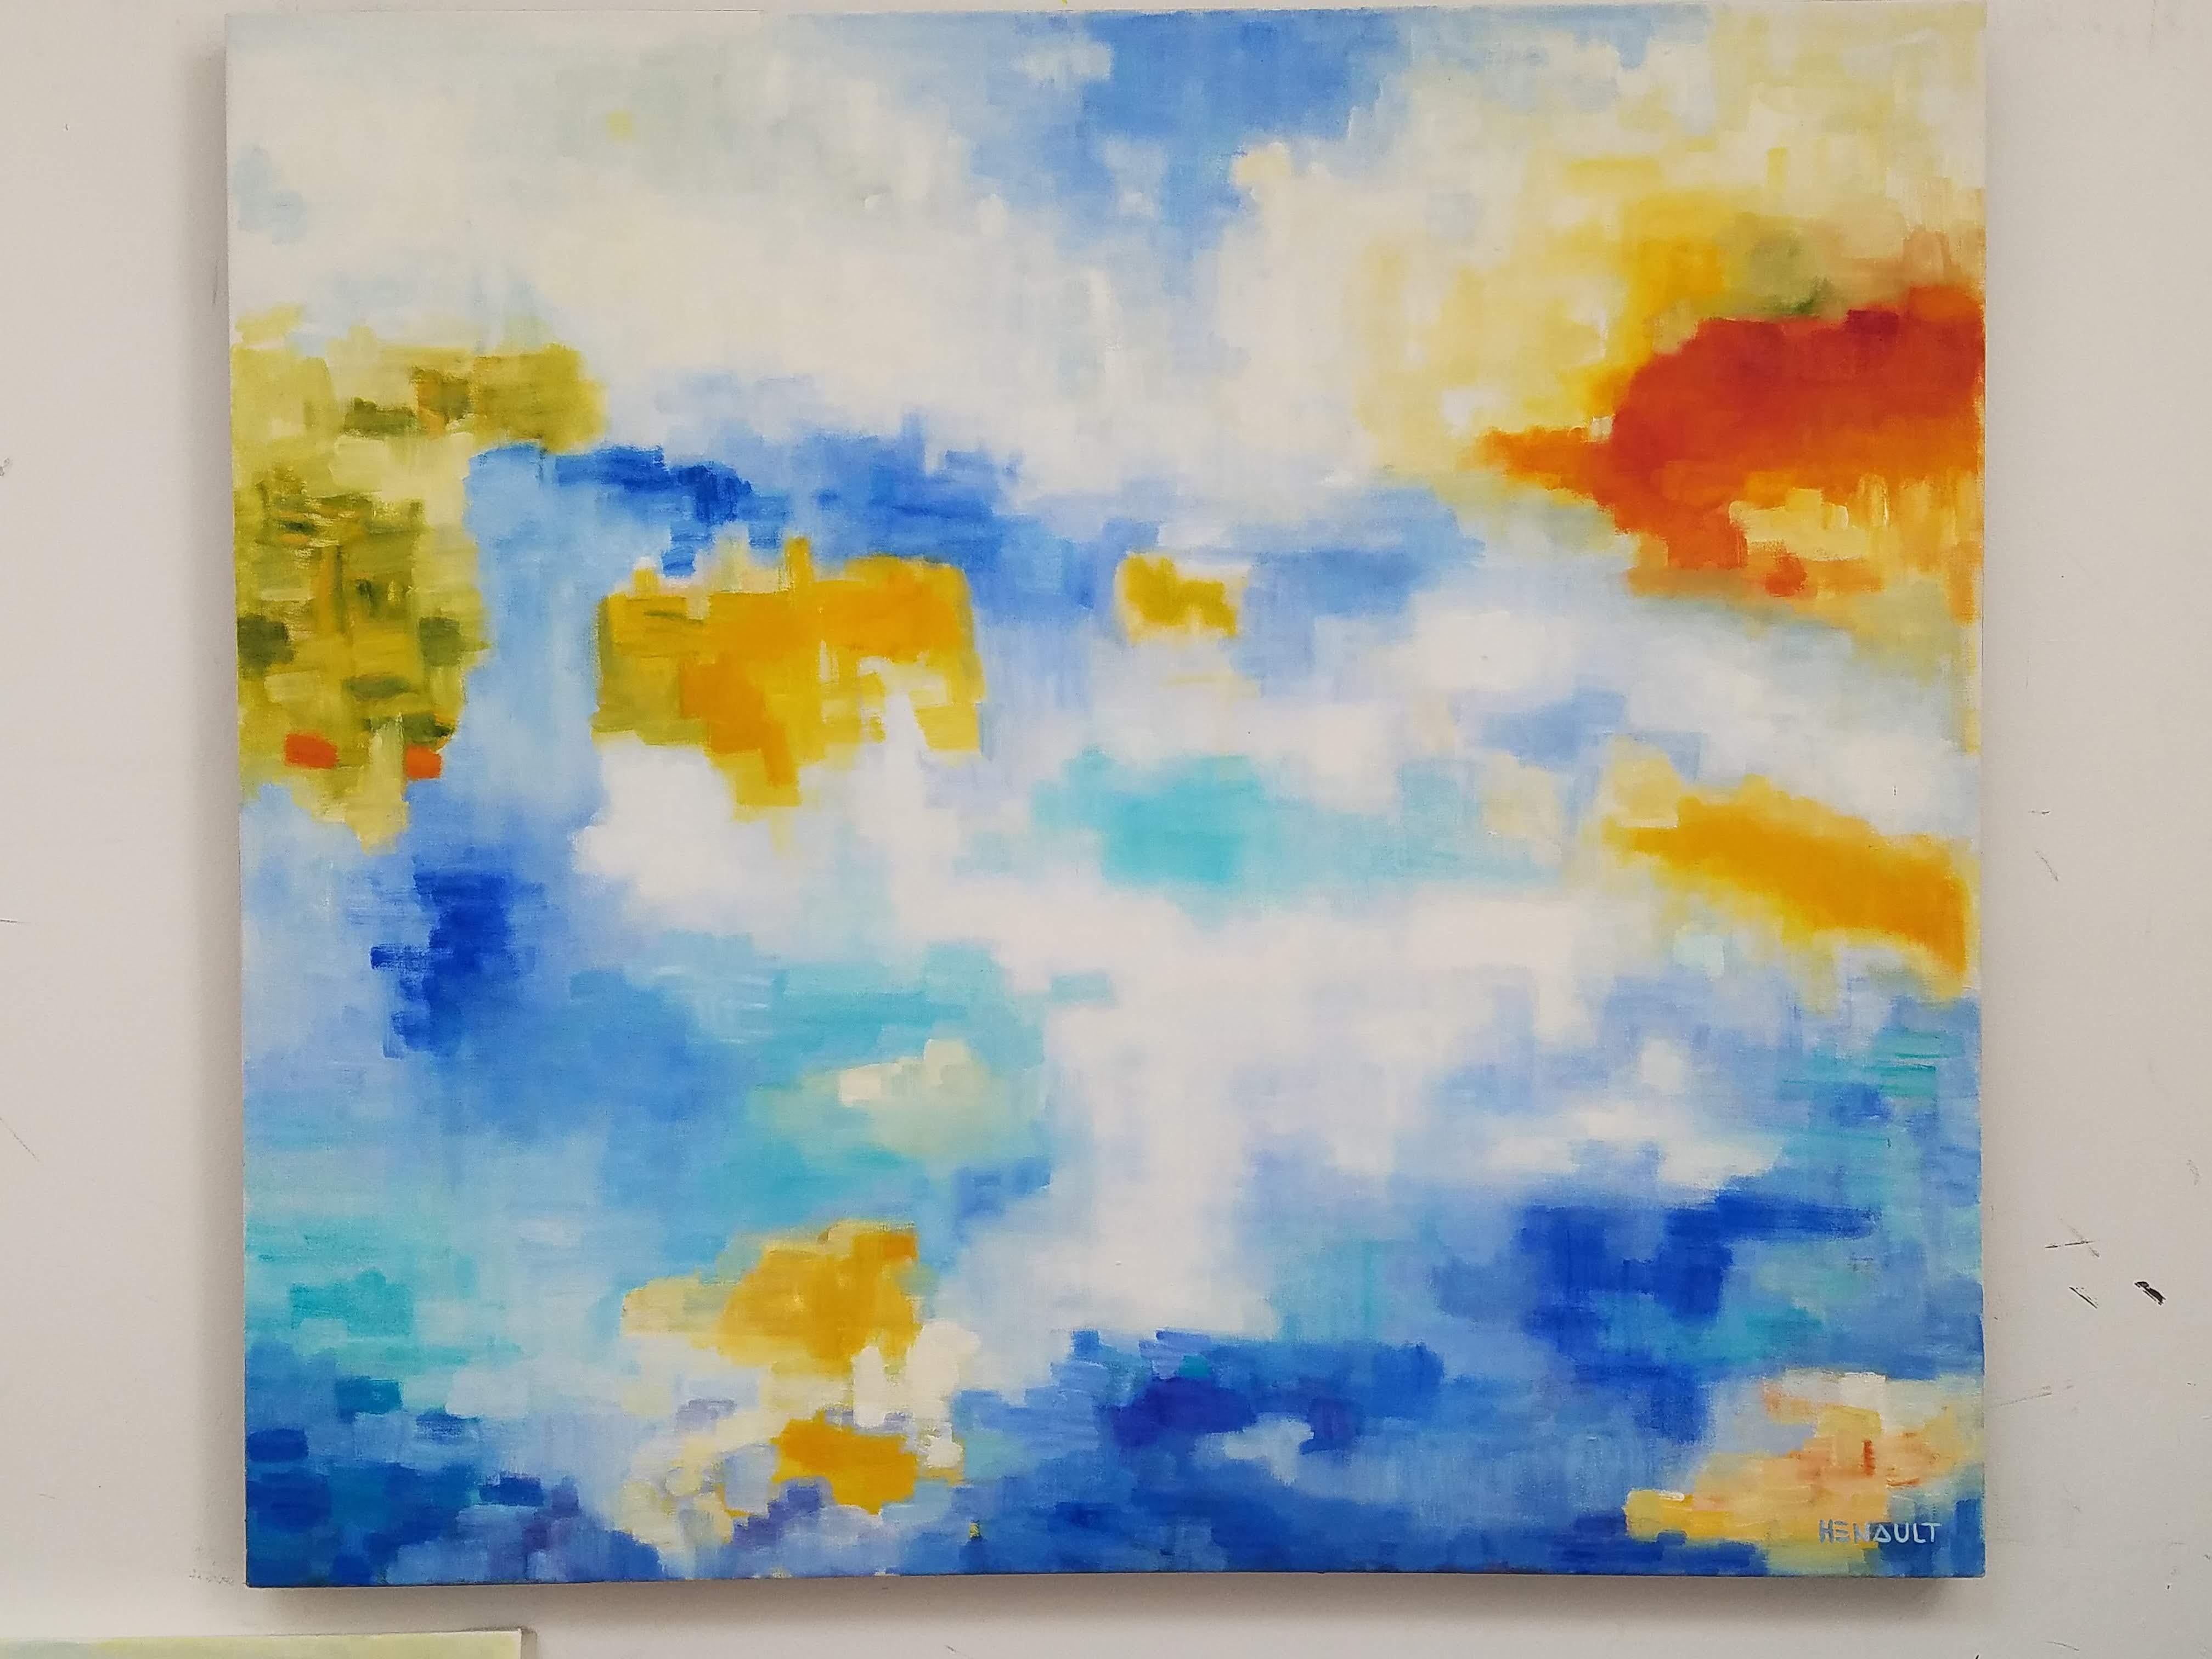 Modern abstract, oil on canvas painting; titled “Lac en Août/The Lake in August” by Michelle Hénault, a conceptual fine artist. Signed on front bottom right, also, signed, dated and titled on back; measuring approx. 36